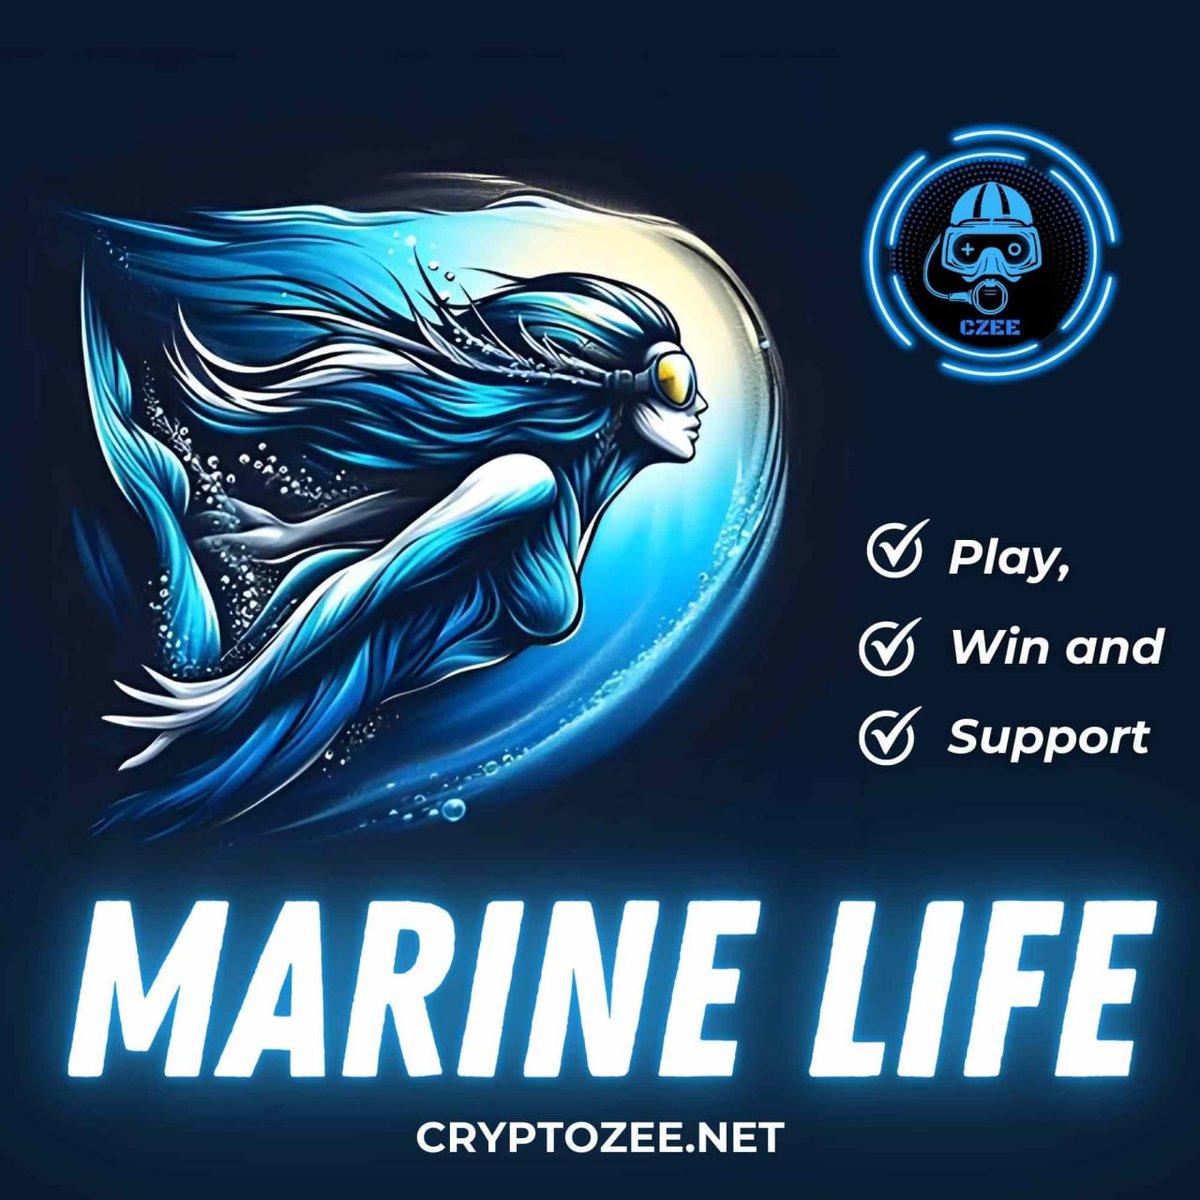 Crypto Zee Game transcends traditional gaming boundaries by incorporating blockchain technology and cryptocurrency, creating a unique and rewarding player experience.

$CZEE #CZEE
🛹
@CryptoZeeGamee
🛹
#CryptoZee #blockchain 
#CMTitans